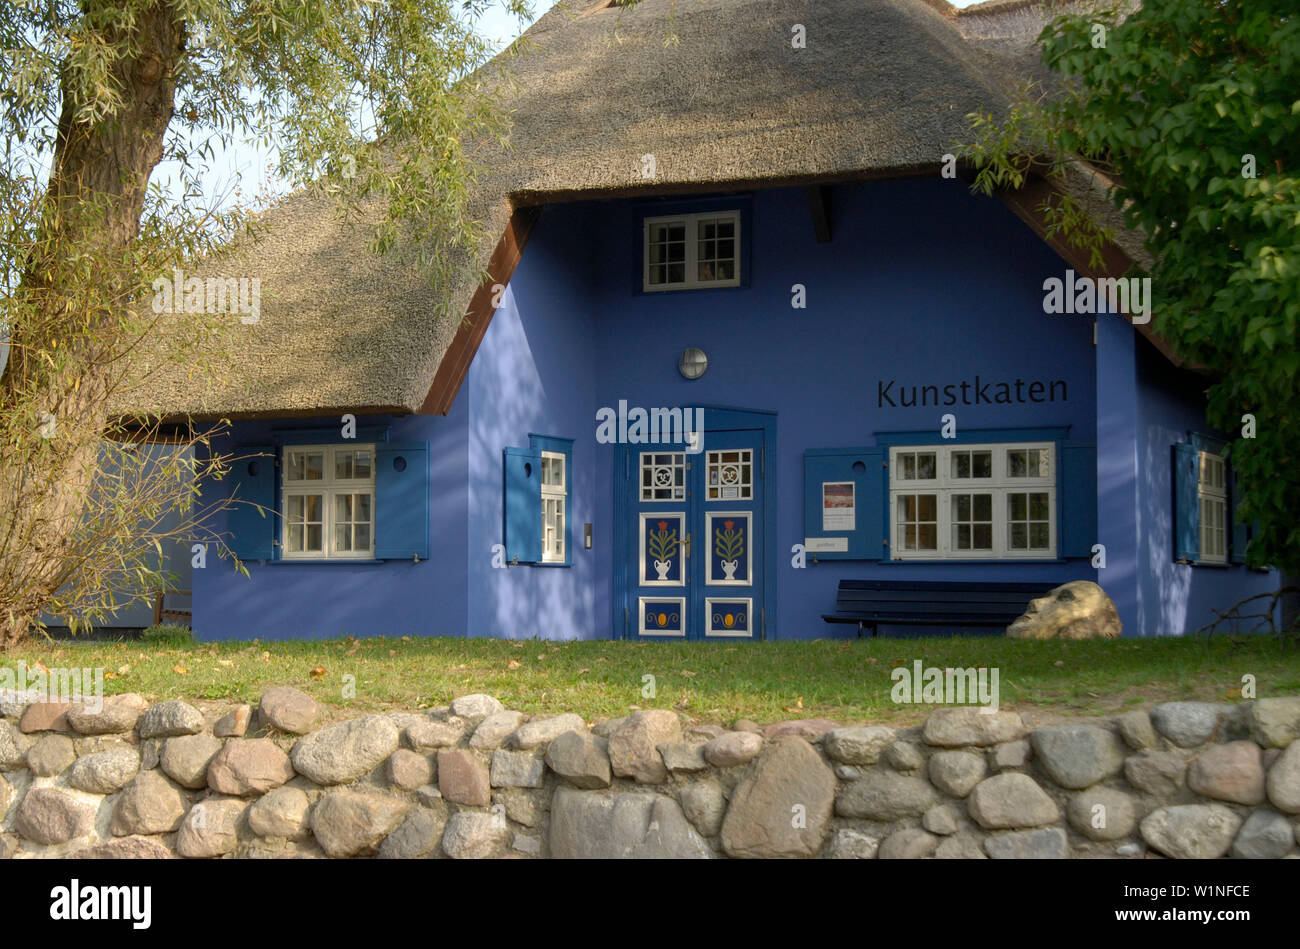 Ahrenshoop, Kunstkaten, house with thatched roof, Mecklenburg-Pomerania, Germany, Europe Stock Photo